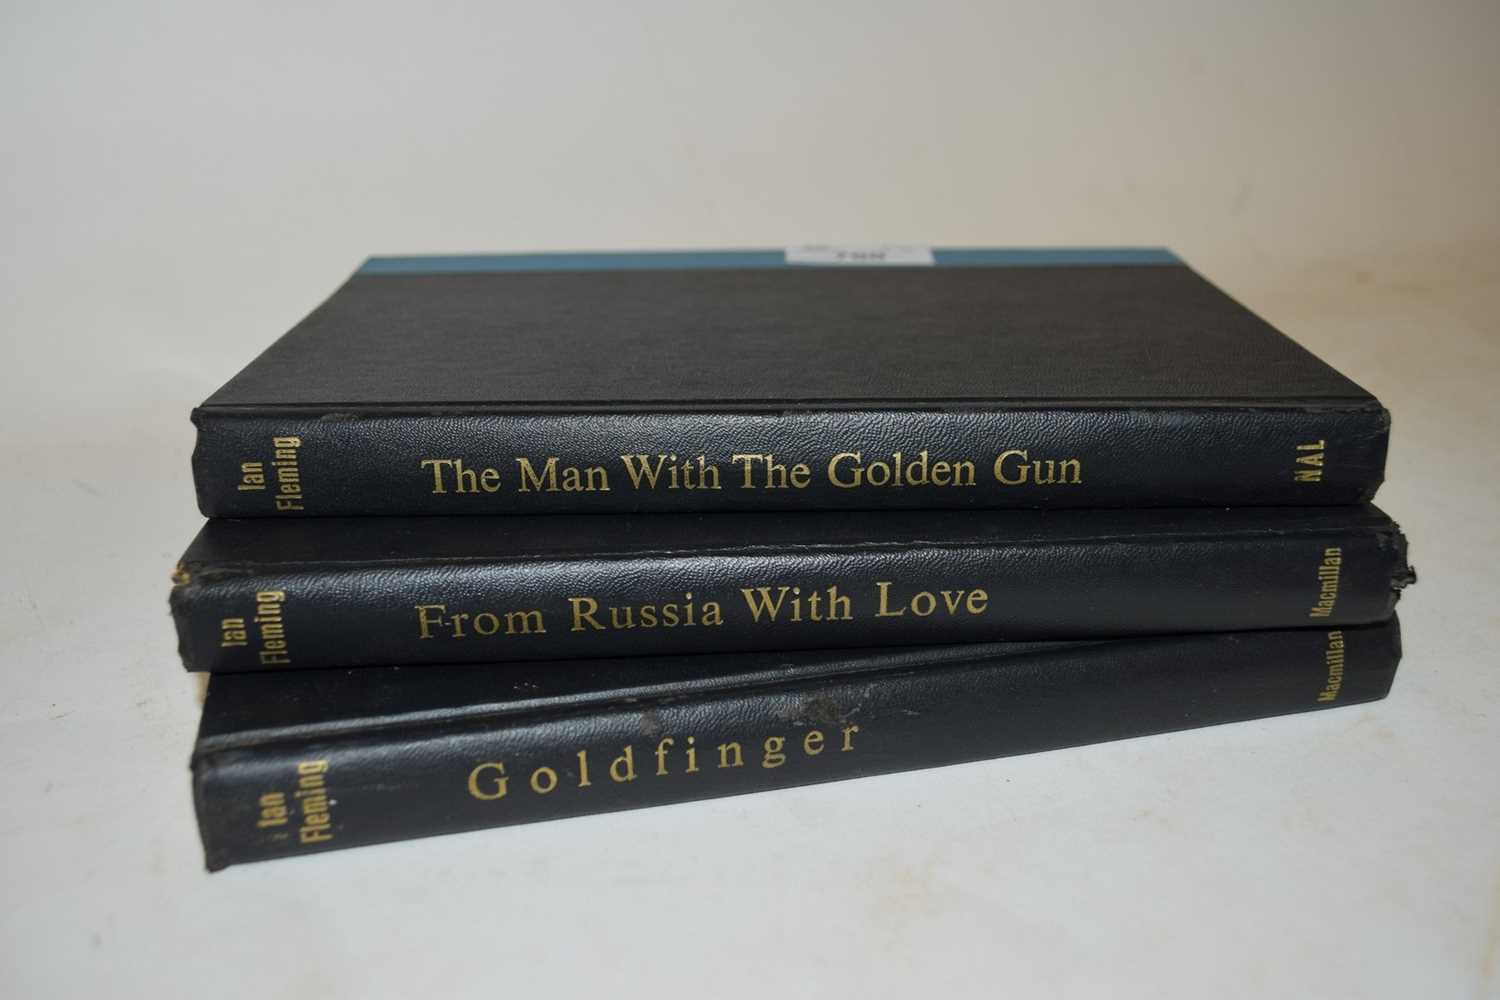 IAN FLEMING, 3 VOLS 'THE MAN WITH THE GOLDEN GUN', 'FROM RUSSIA WITH LOVE' AND 'GOLDFINGER' (3)